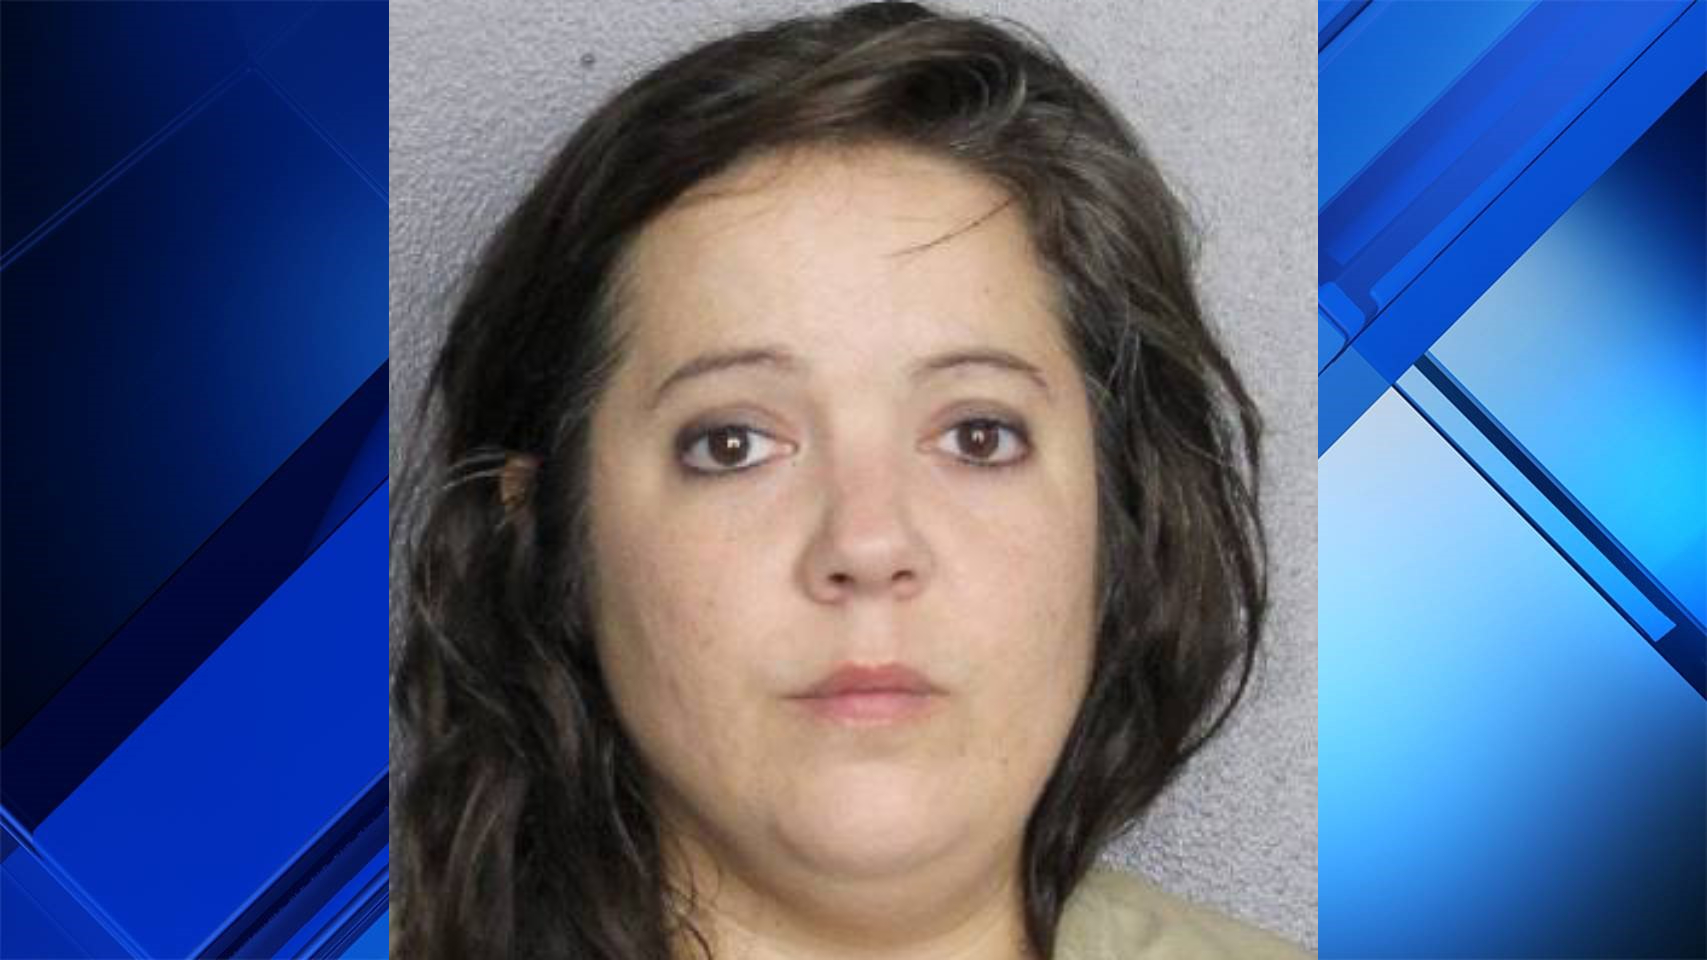 Angela Sex Dog - Broward woman shared child sex abuse videos, also sexually abused own dog,  police say